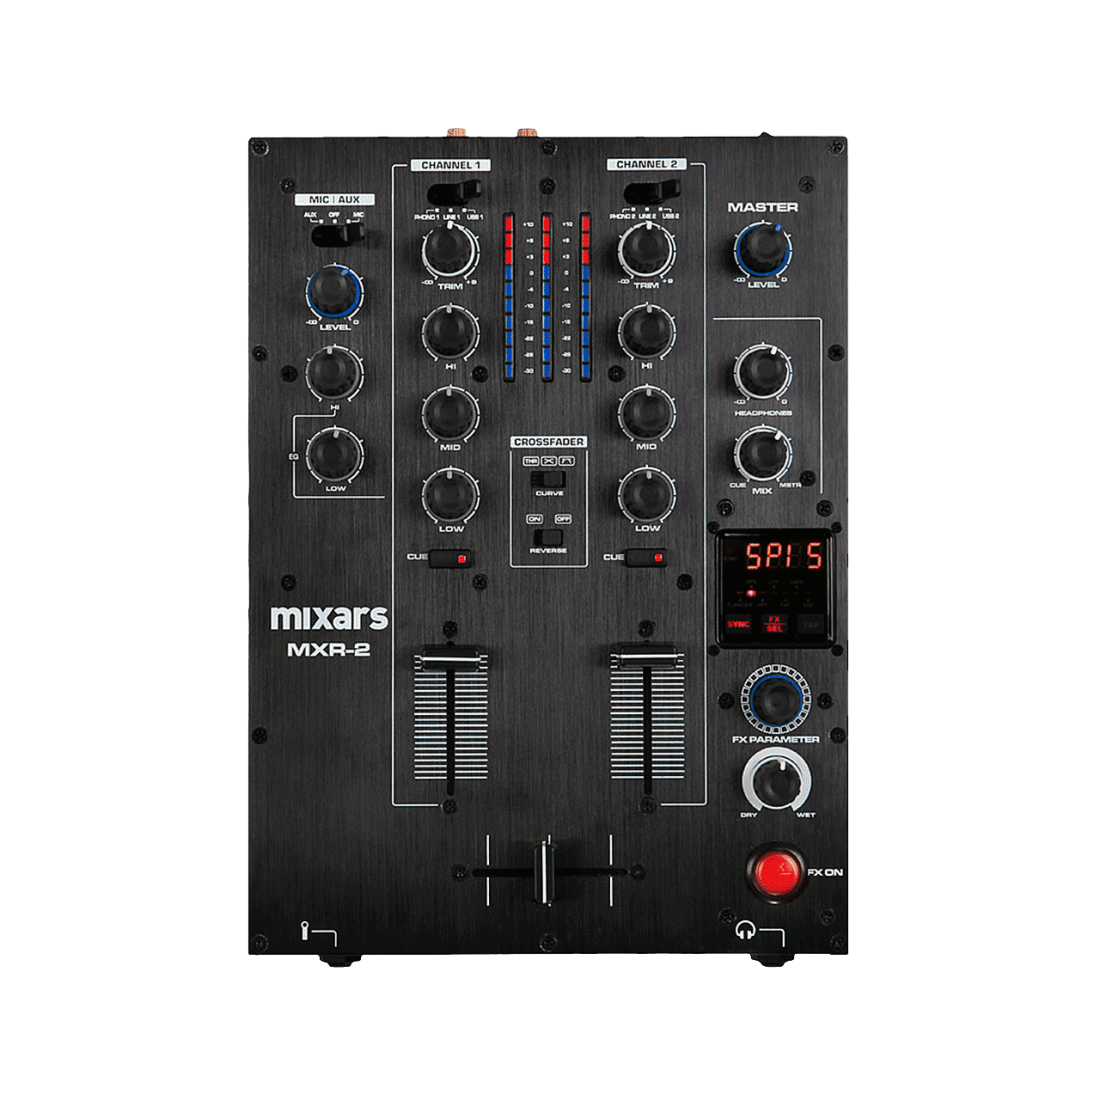 MXR-2 Channel Effect Mixer with 4 I/O Soundcard